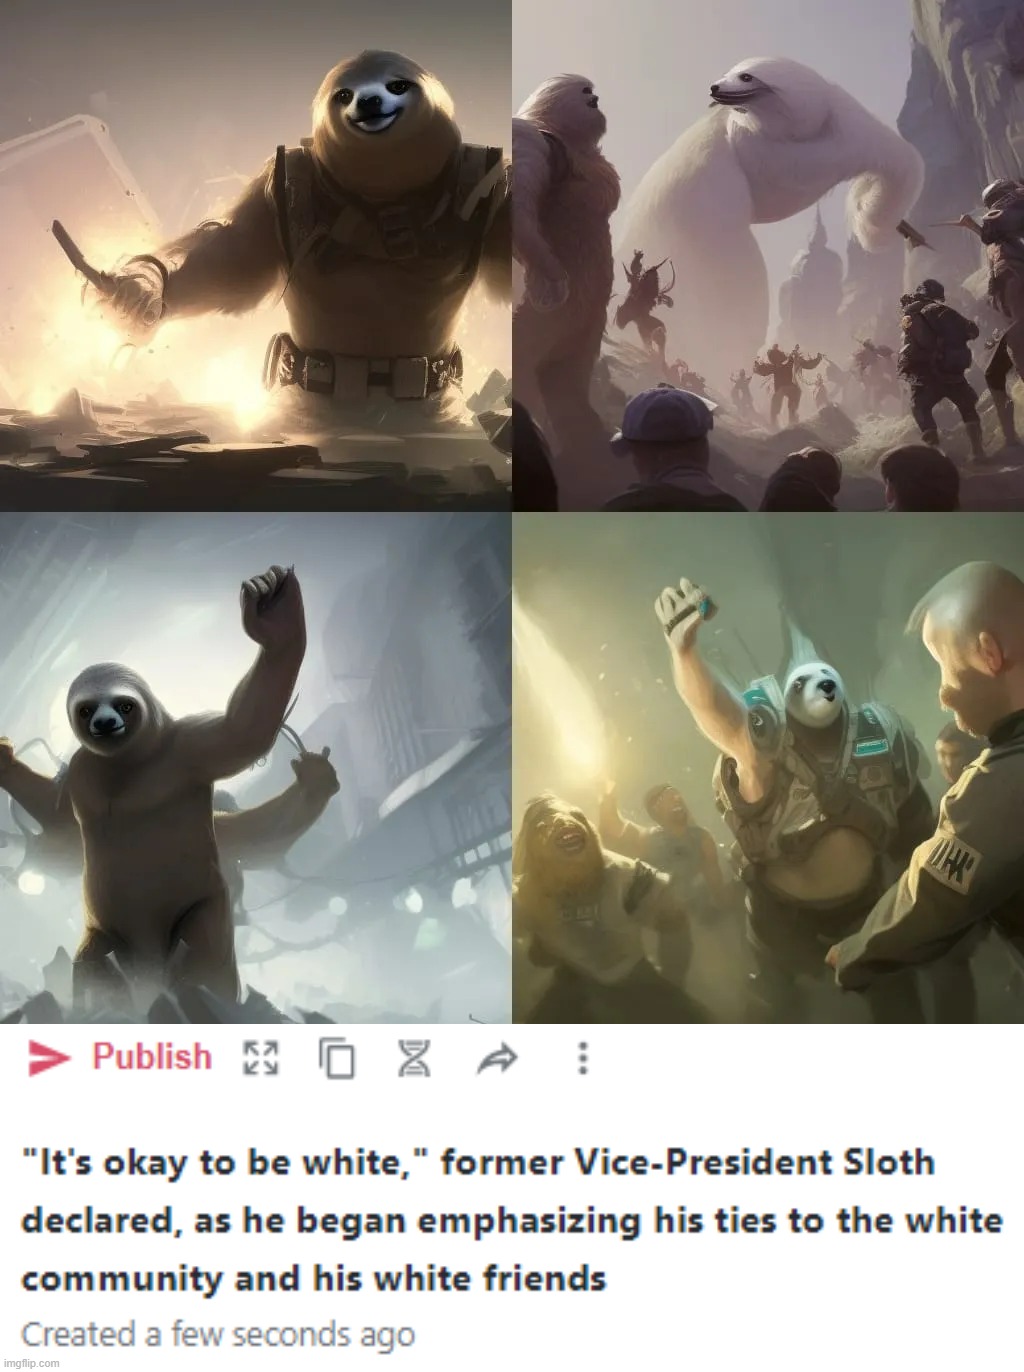 image tagged in it's okay to be white former vice-president sloth declared a | made w/ Imgflip meme maker